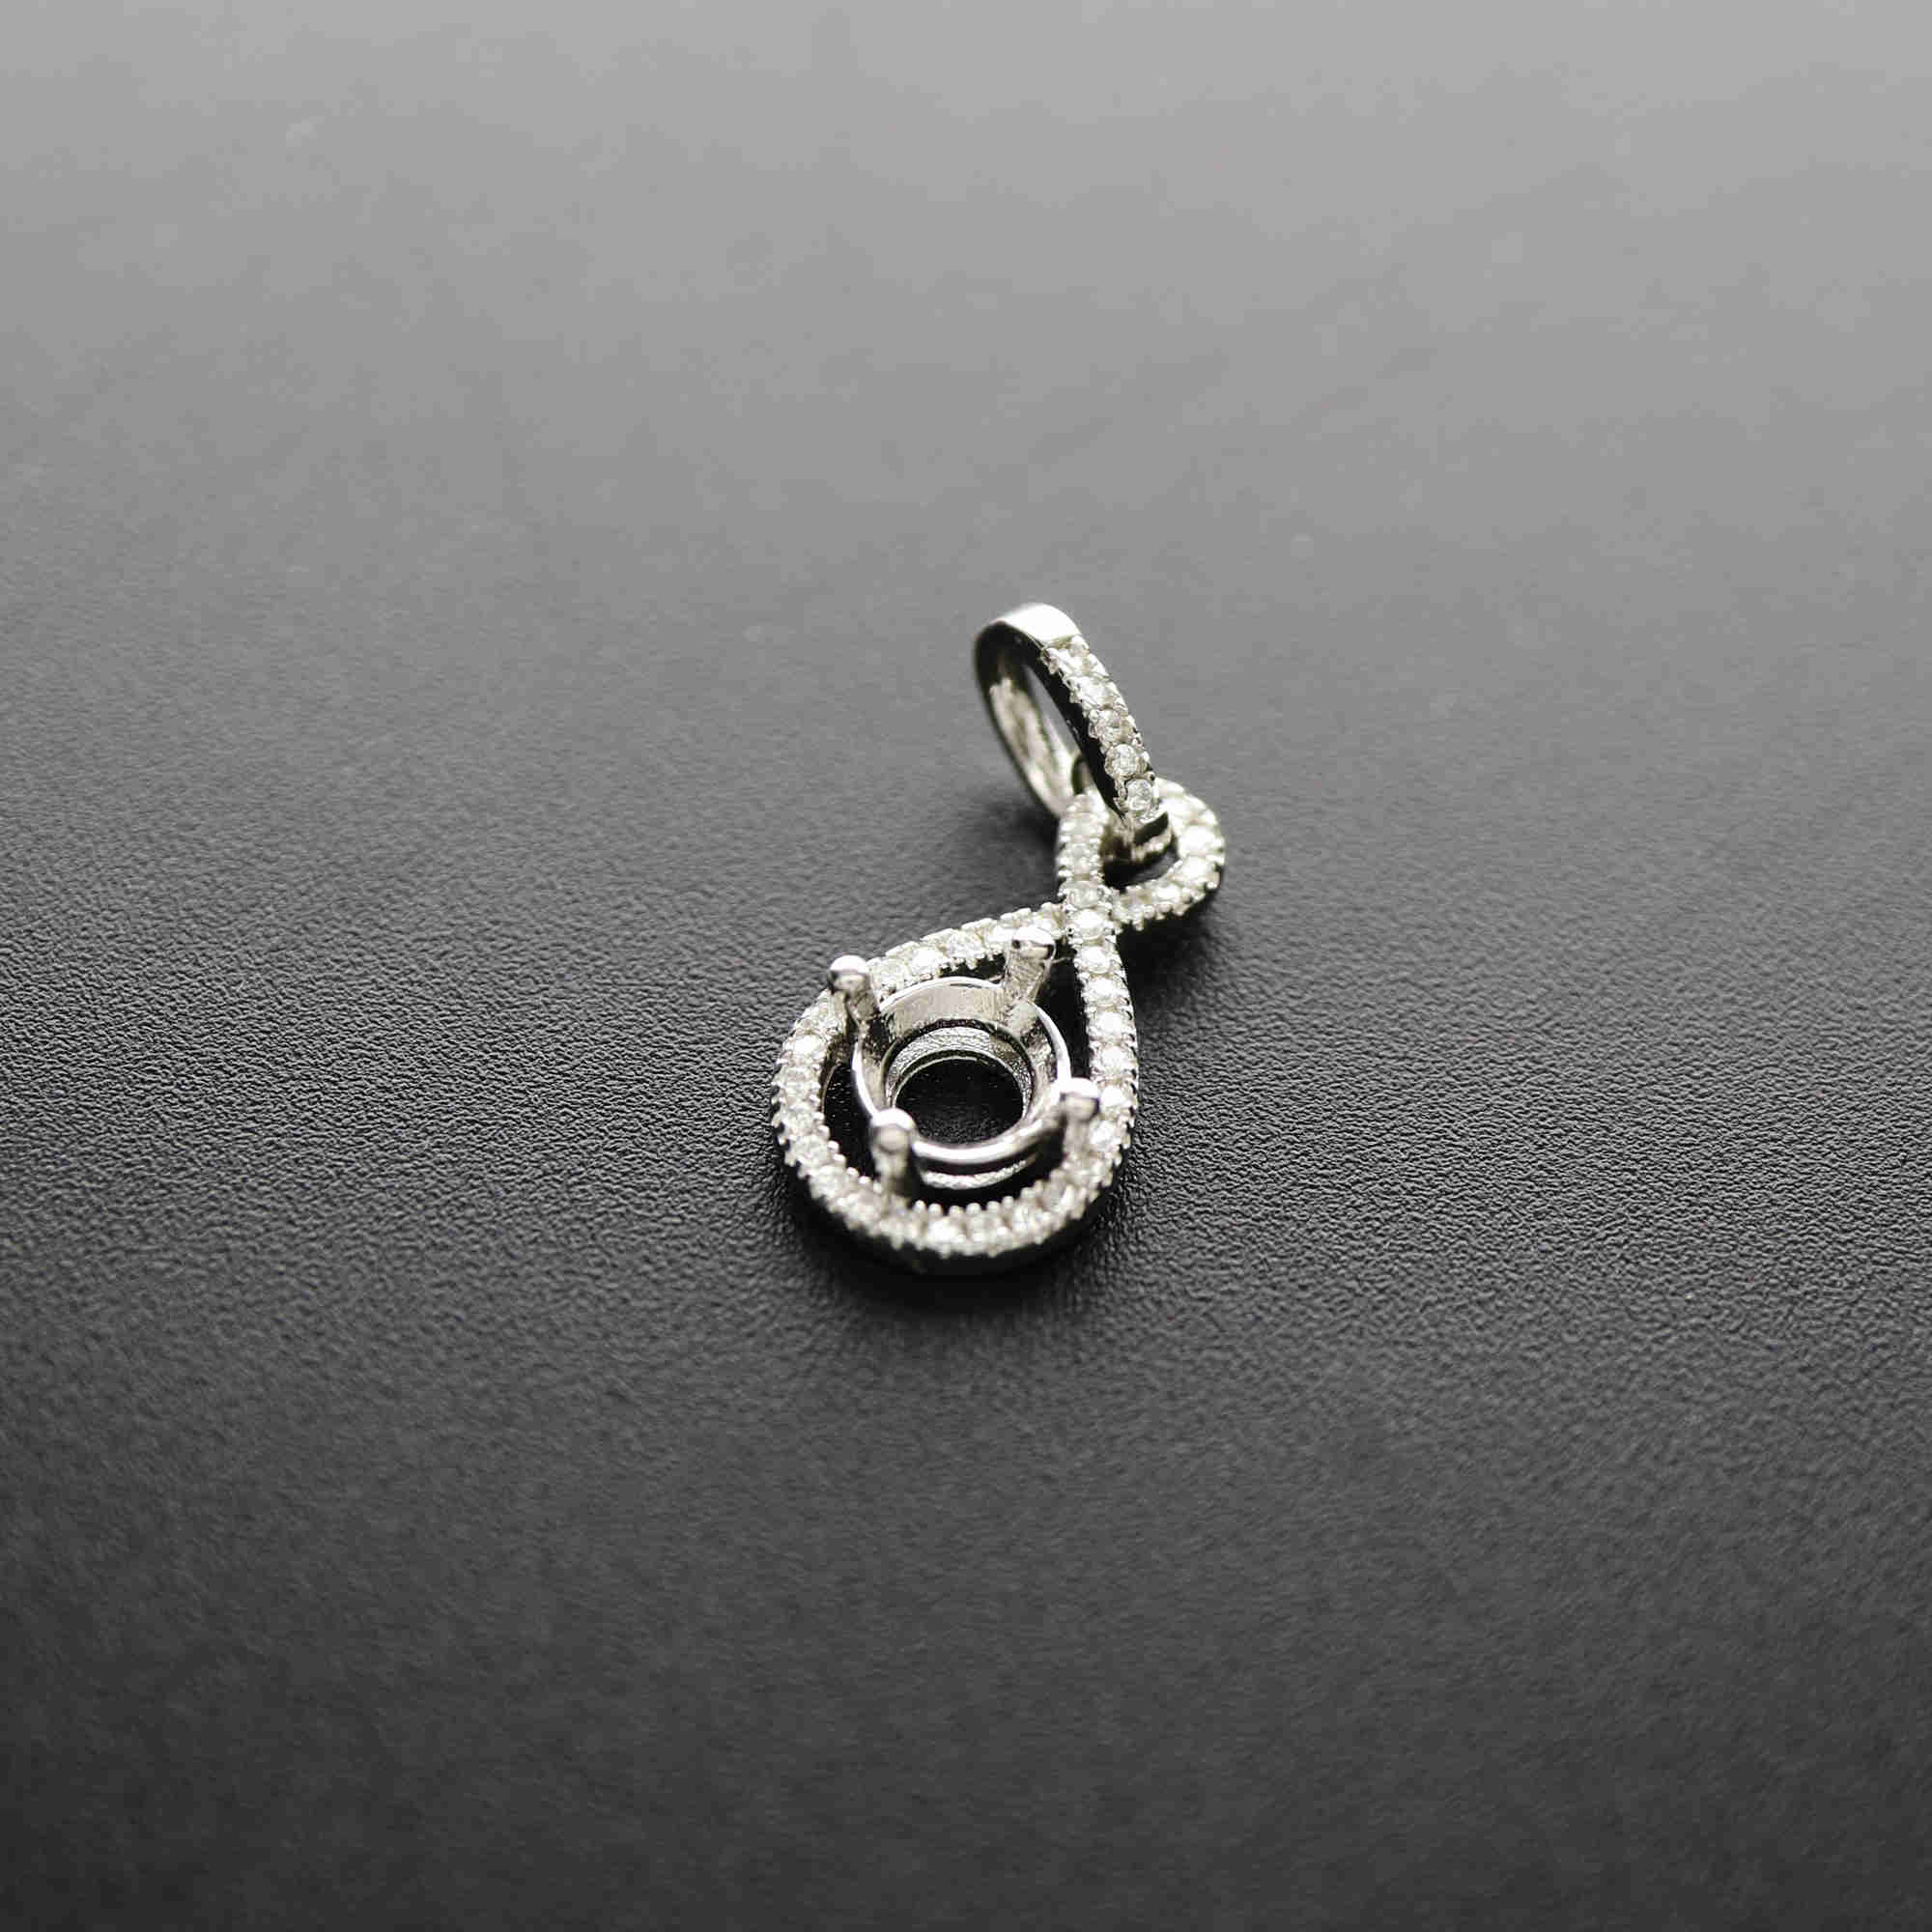 1Pcs 6.5MM Round Bezel Gemstone Cz Stone Solid 925 Sterling Silver Prong Pendant Charm Settings 1411228 - Click Image to Close